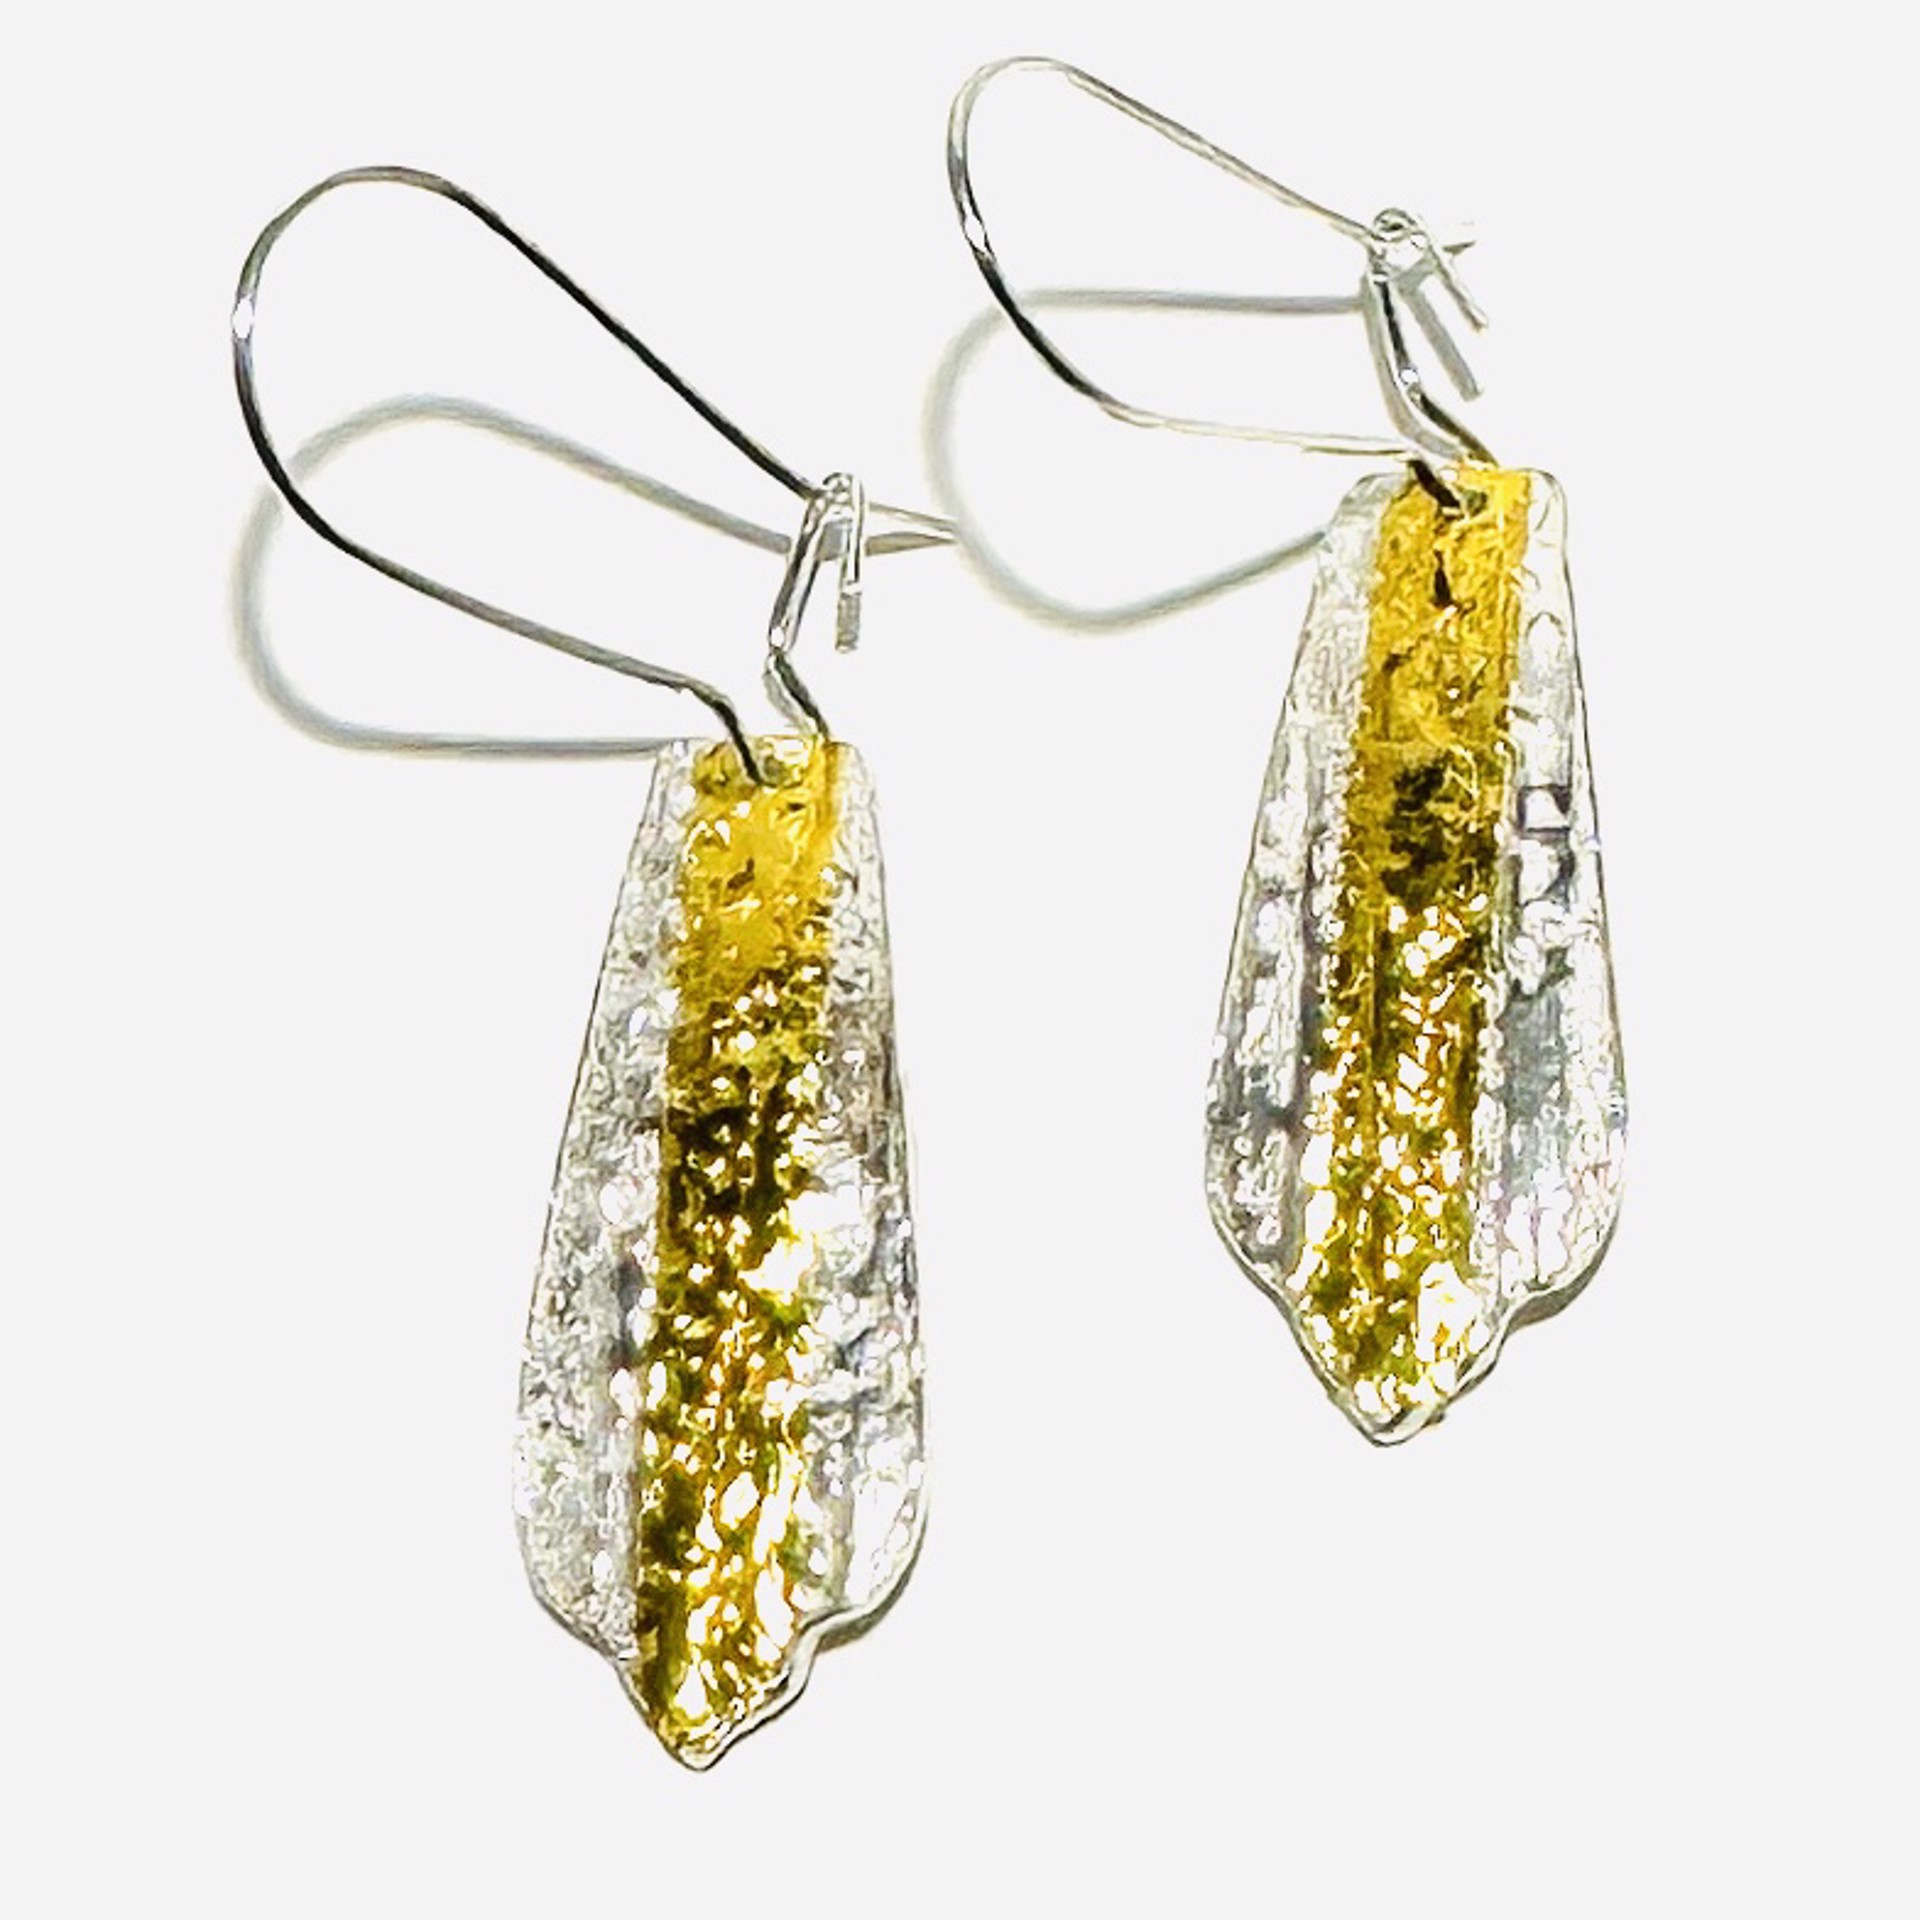 Keum-boo Fine Silver and Gold Earrings KH23-18 by Karen Hakim